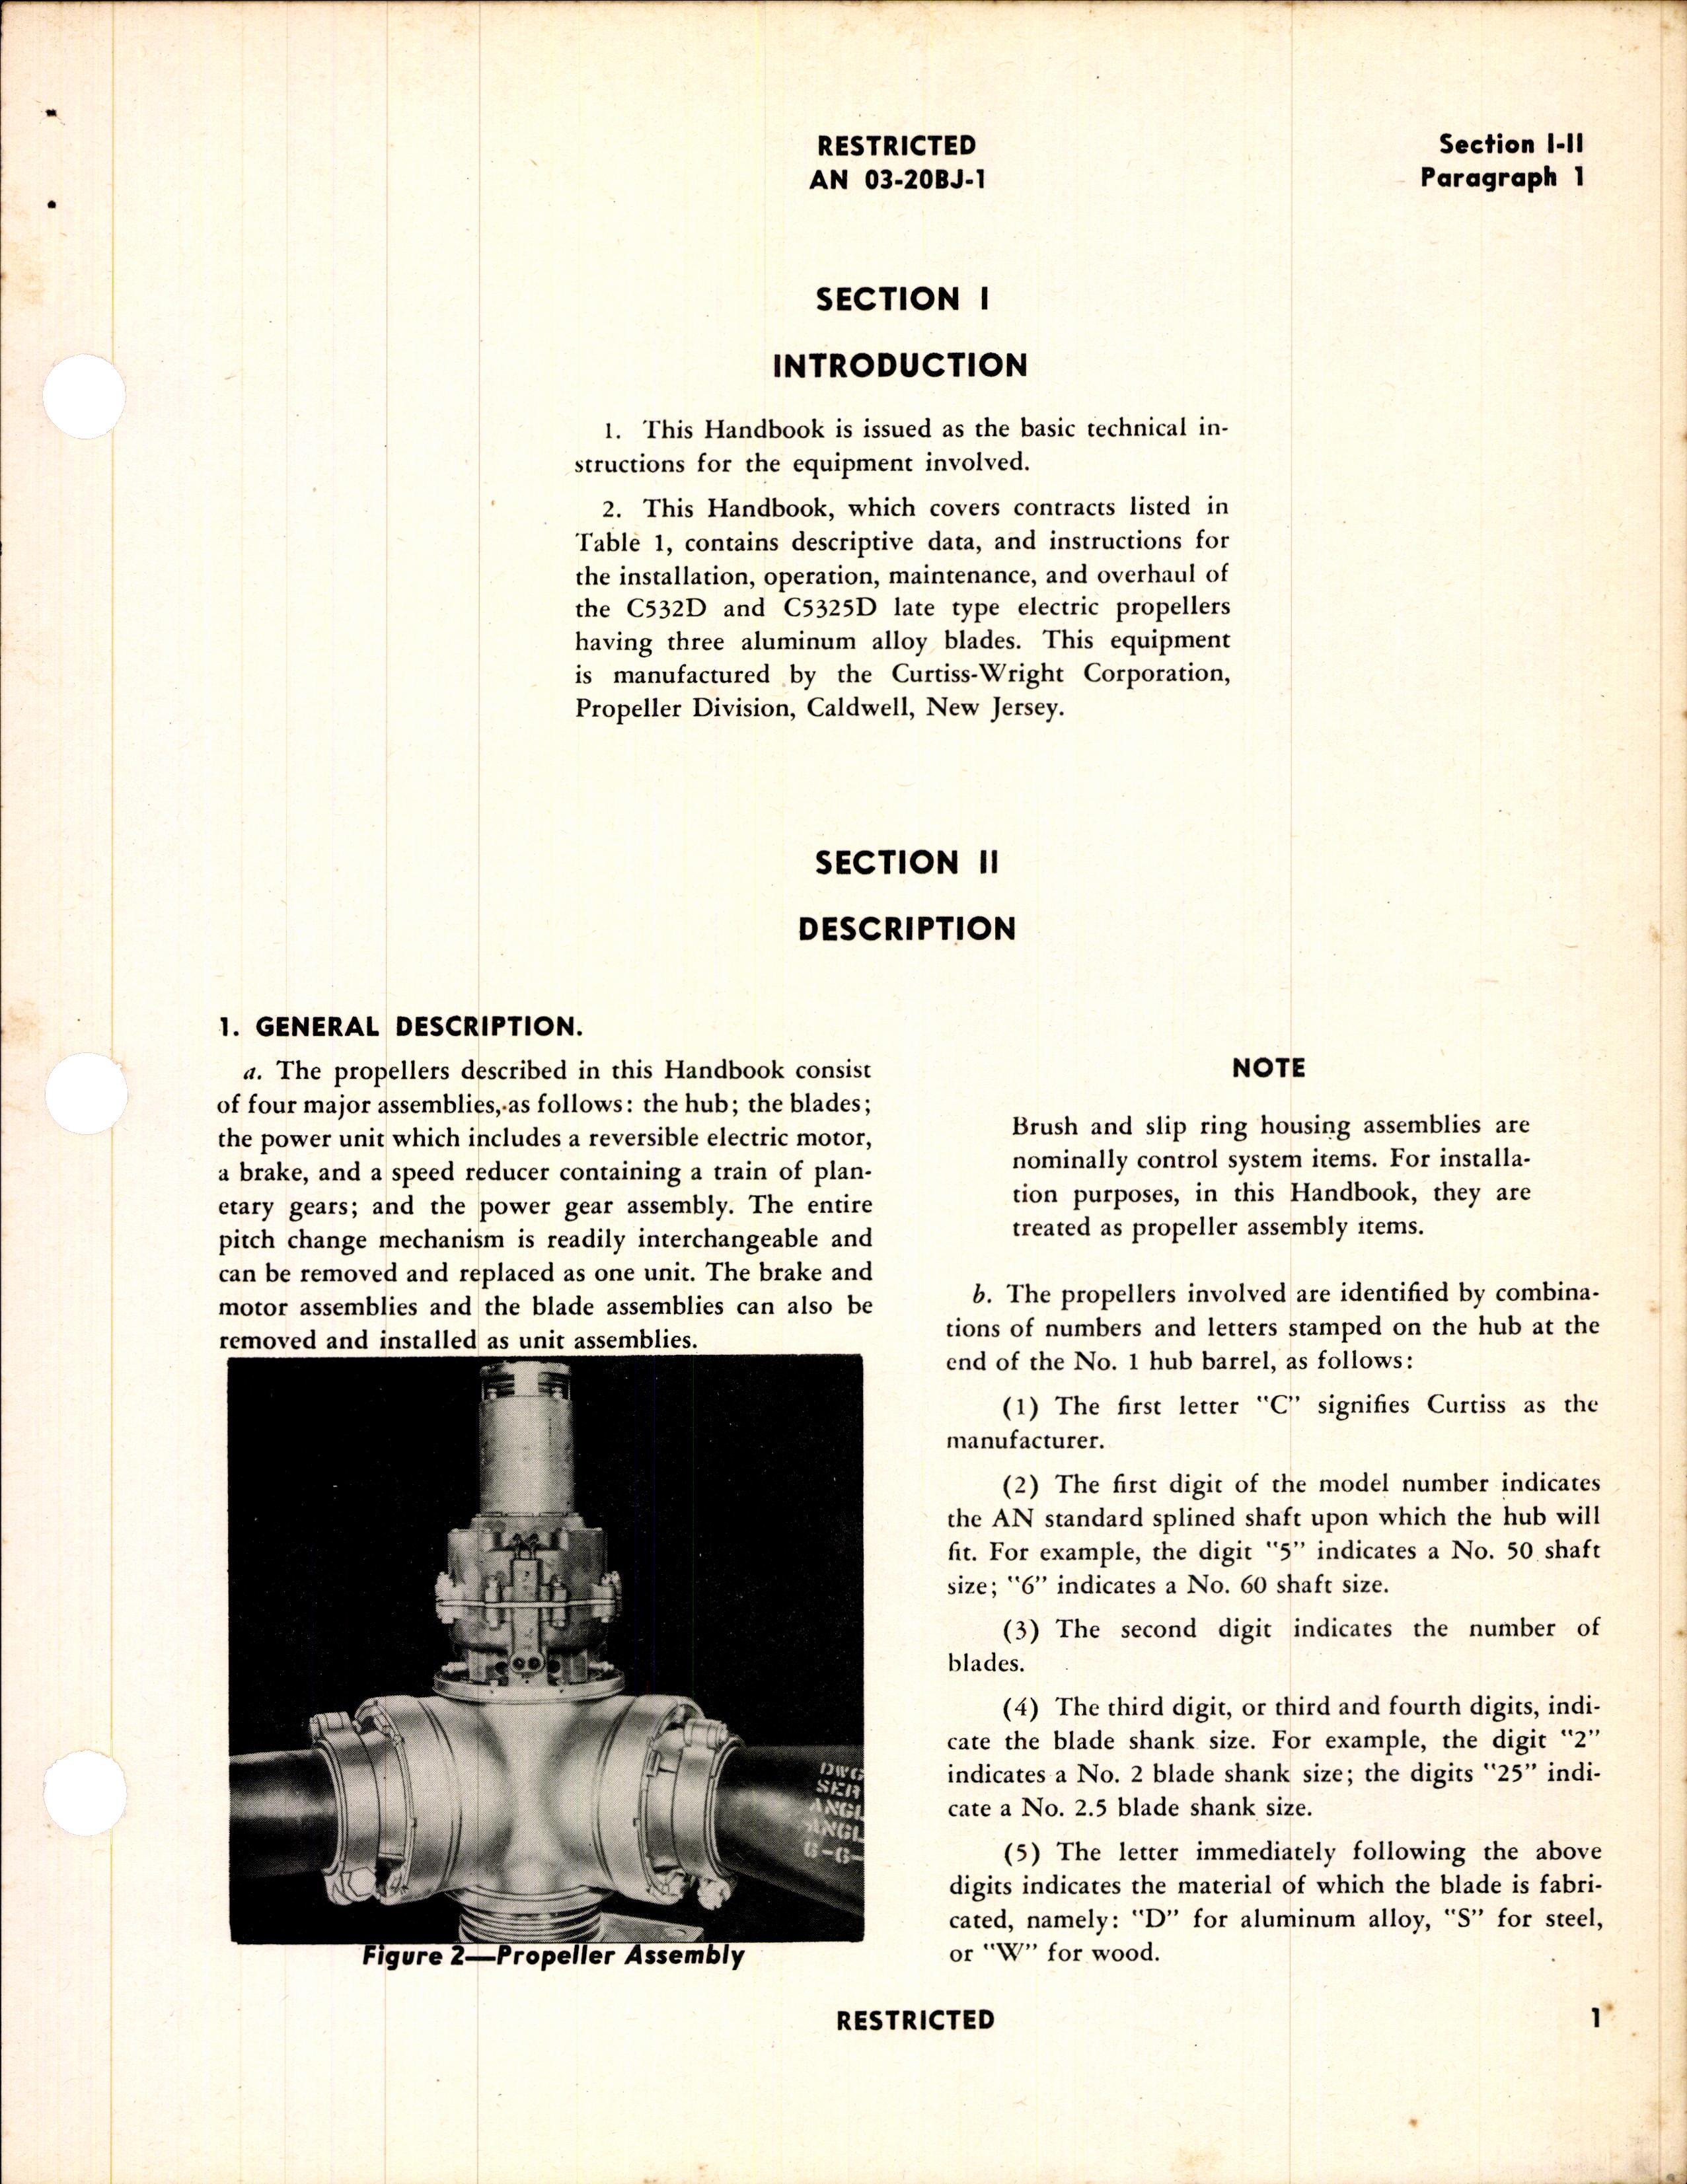 Sample page 7 from AirCorps Library document: Operation, Service, & Overhaul Instructions for Curtiss-Wright Models C532D & C5325D Electric Propellers